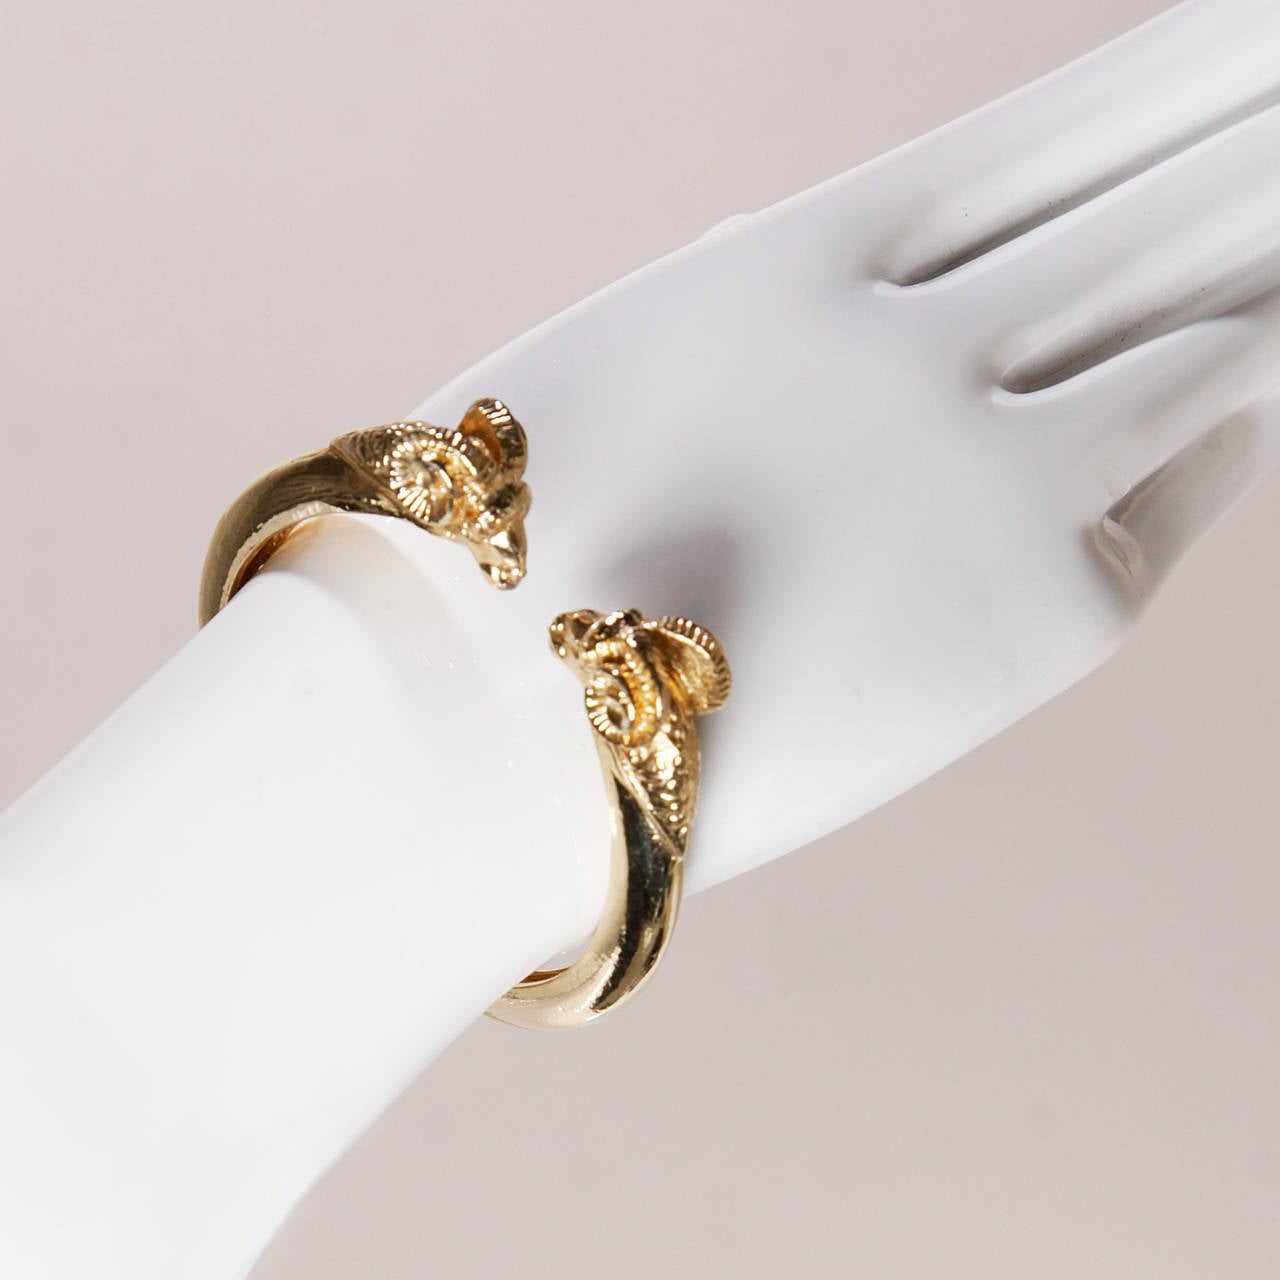 Calling all Aries! Vintage gold tone ram's head bracelet by Donald Stannard. Signed on the inside of the piece.

Details:

Adjustable Spring Cuff
Color: Goldtone Metal
Label: Donald Stannard

Measurements:

Inside Width: 2